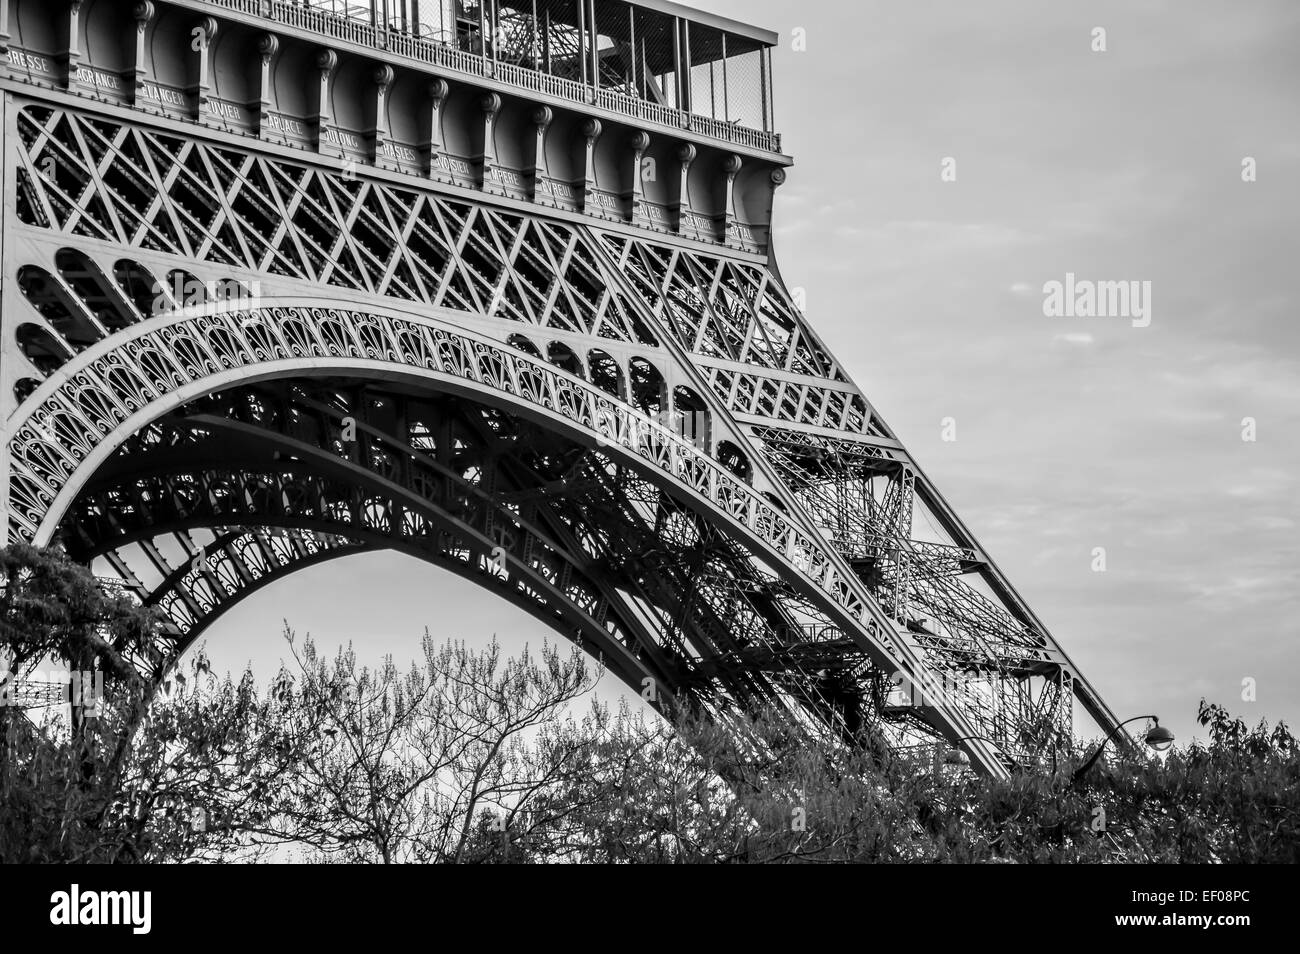 Foot of the Eiffel Tower in black and white Stock Photo